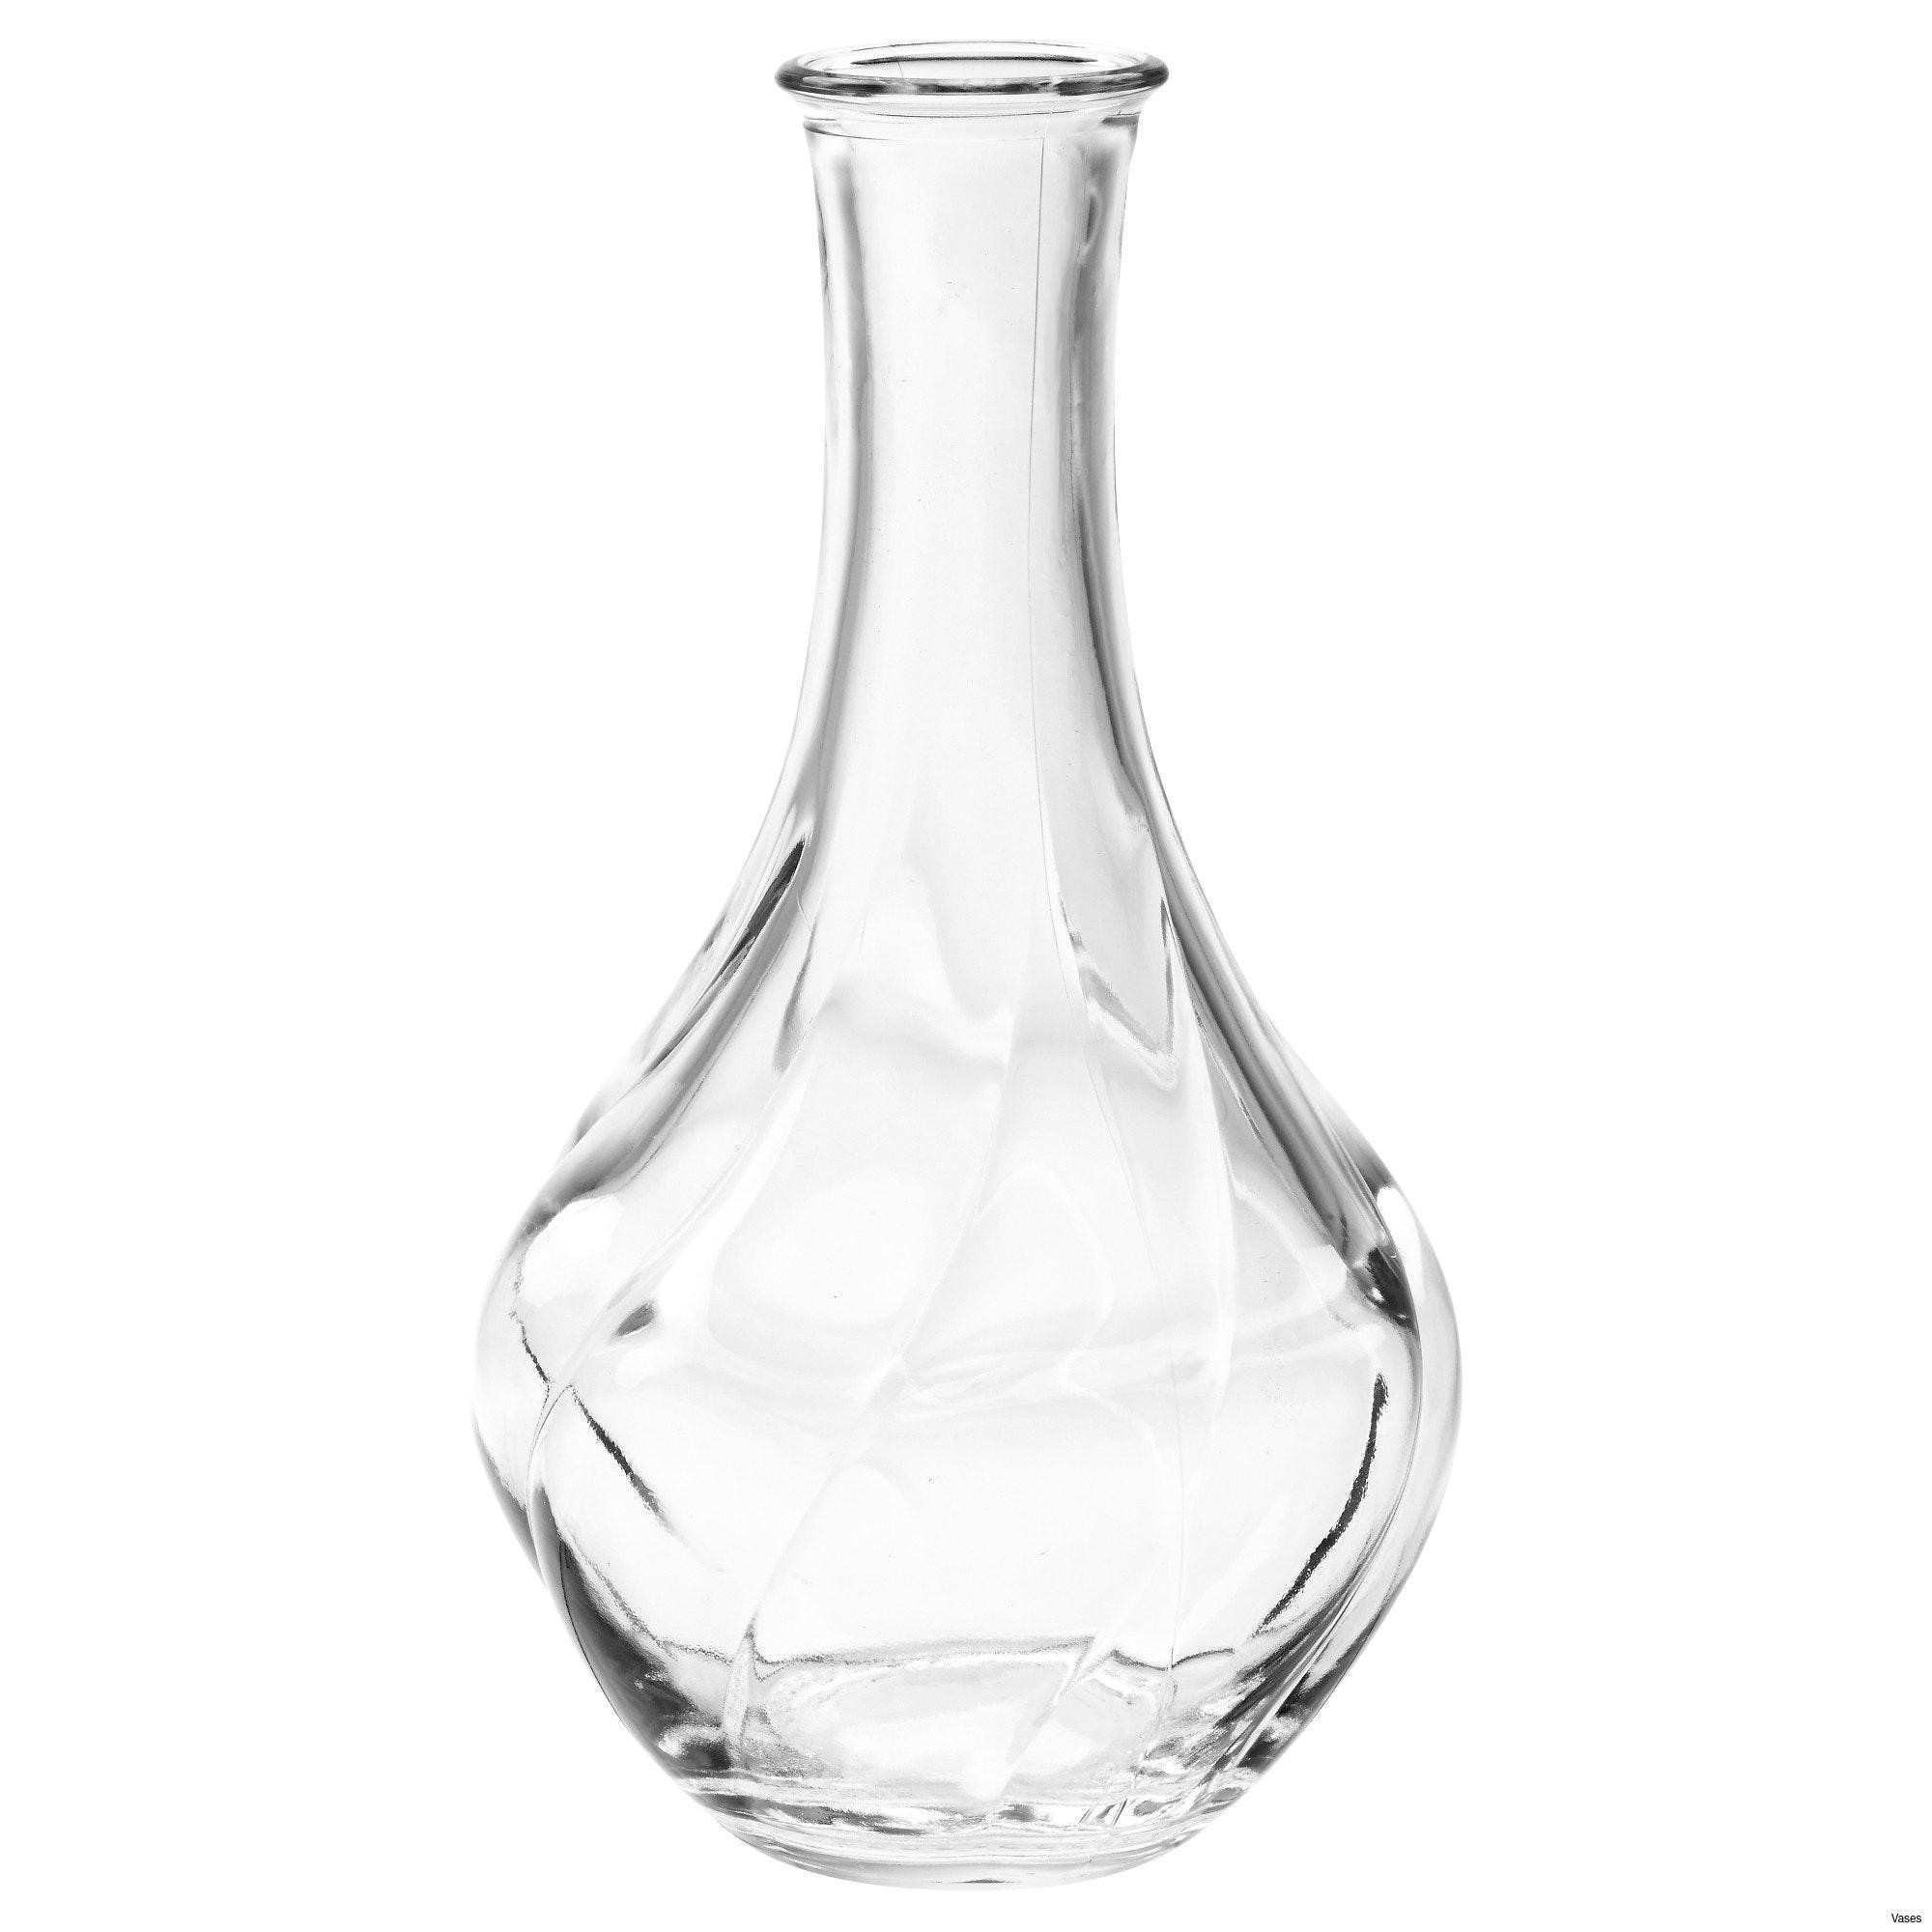 30 Elegant Tj Maxx Glass Vases 2022 free download tj maxx glass vases of small glass vase photos vases floating candle vase set glass throughout small glass vase pics small outdoor lights best living room glass vases fresh clear of small